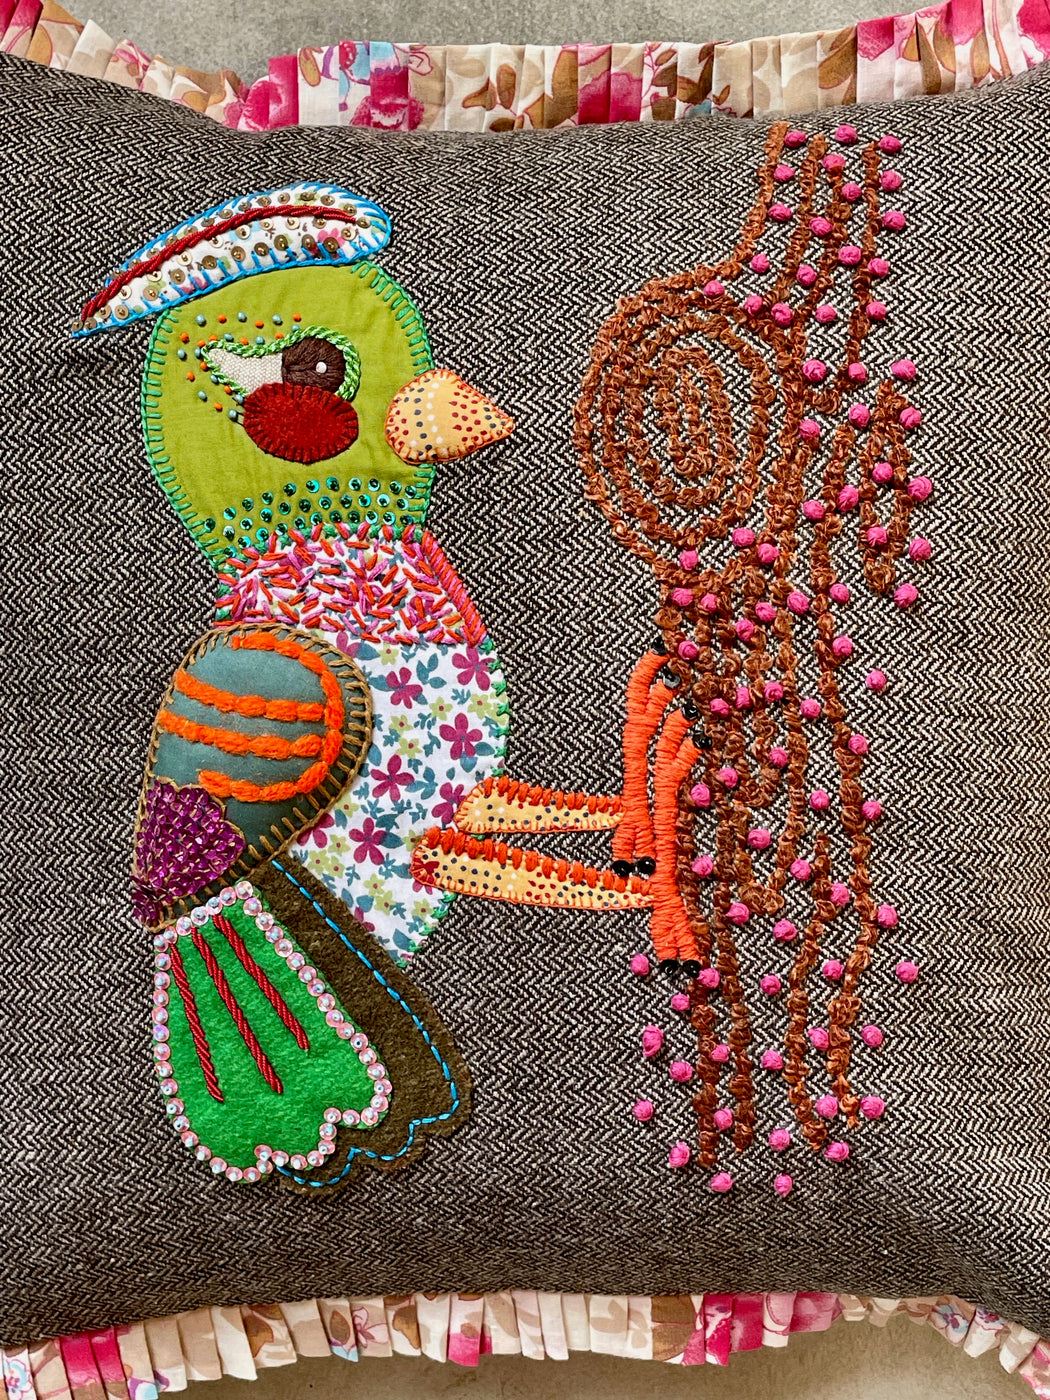 Nathalie Lete Hand-Embroidered "Woodpecker" Pillow